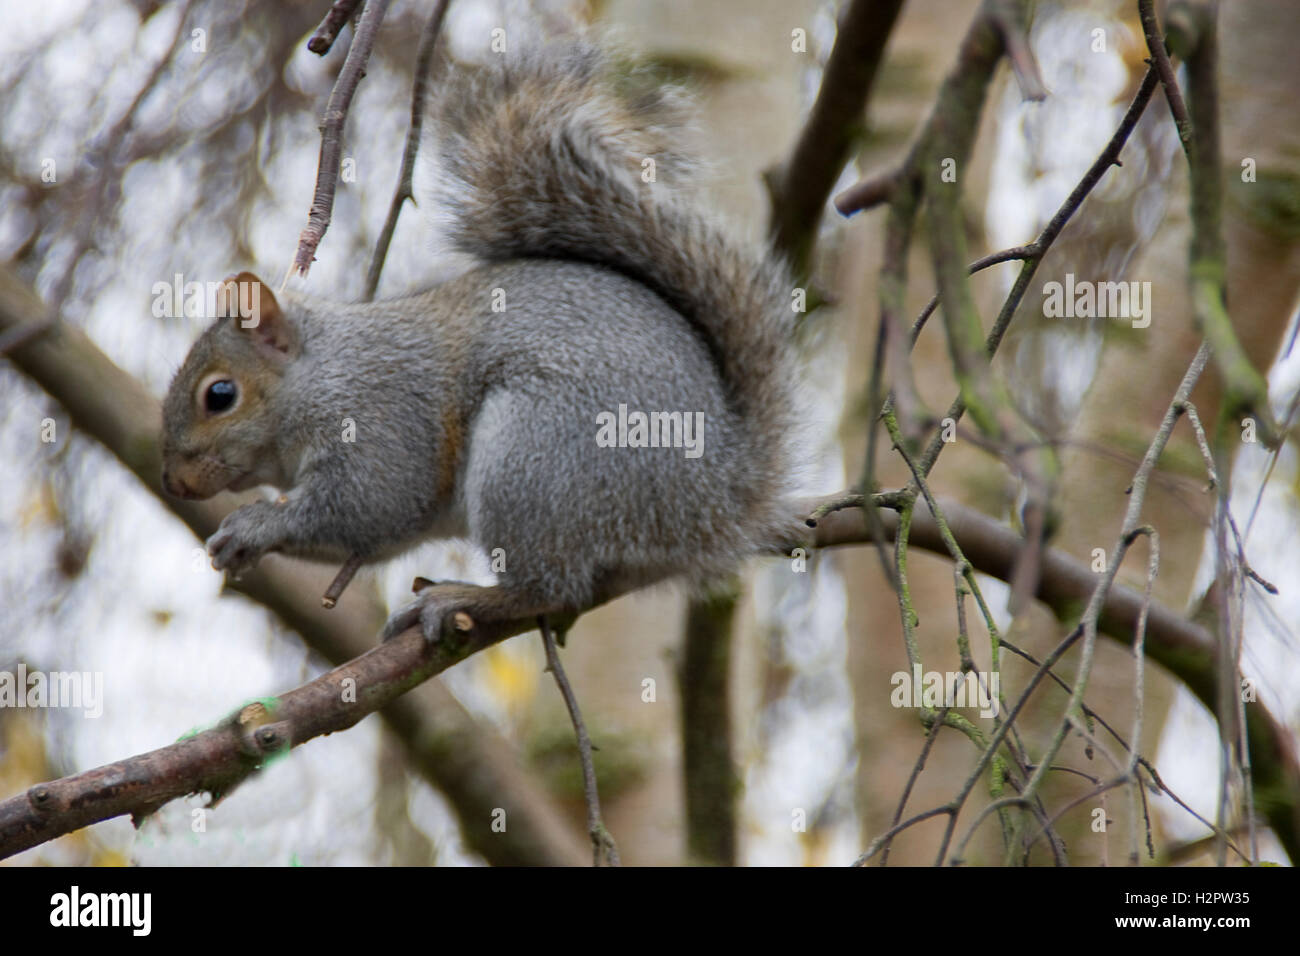 A grey squirrel sitting in a tree eating a nut Stock Photo